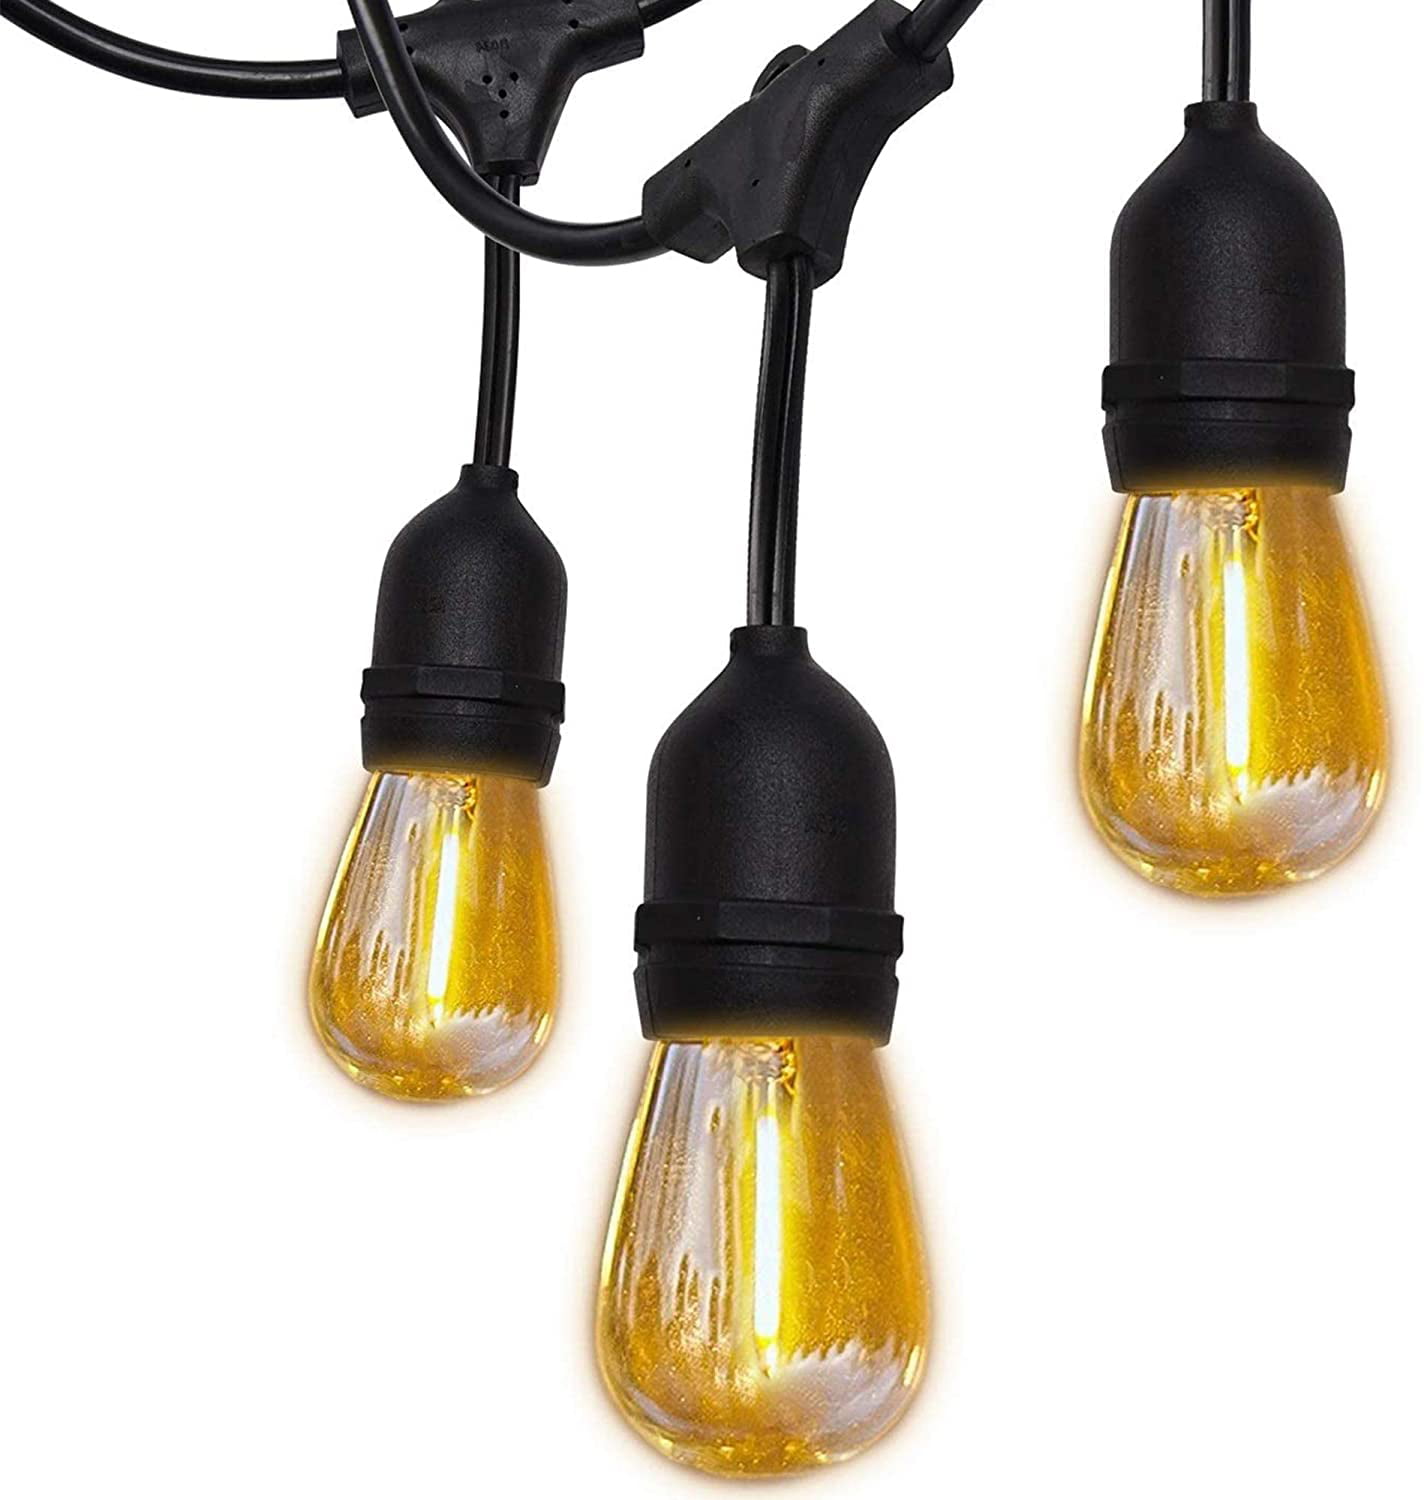 Porch Market Light 48FT with 2W Dimmable Edison Vintage Plastic Bulbs and Commercial Great Weatherproof Strand UL Listed Heavy-Duty Decorative LED Café Patio Light LED Outdoor String Lights 